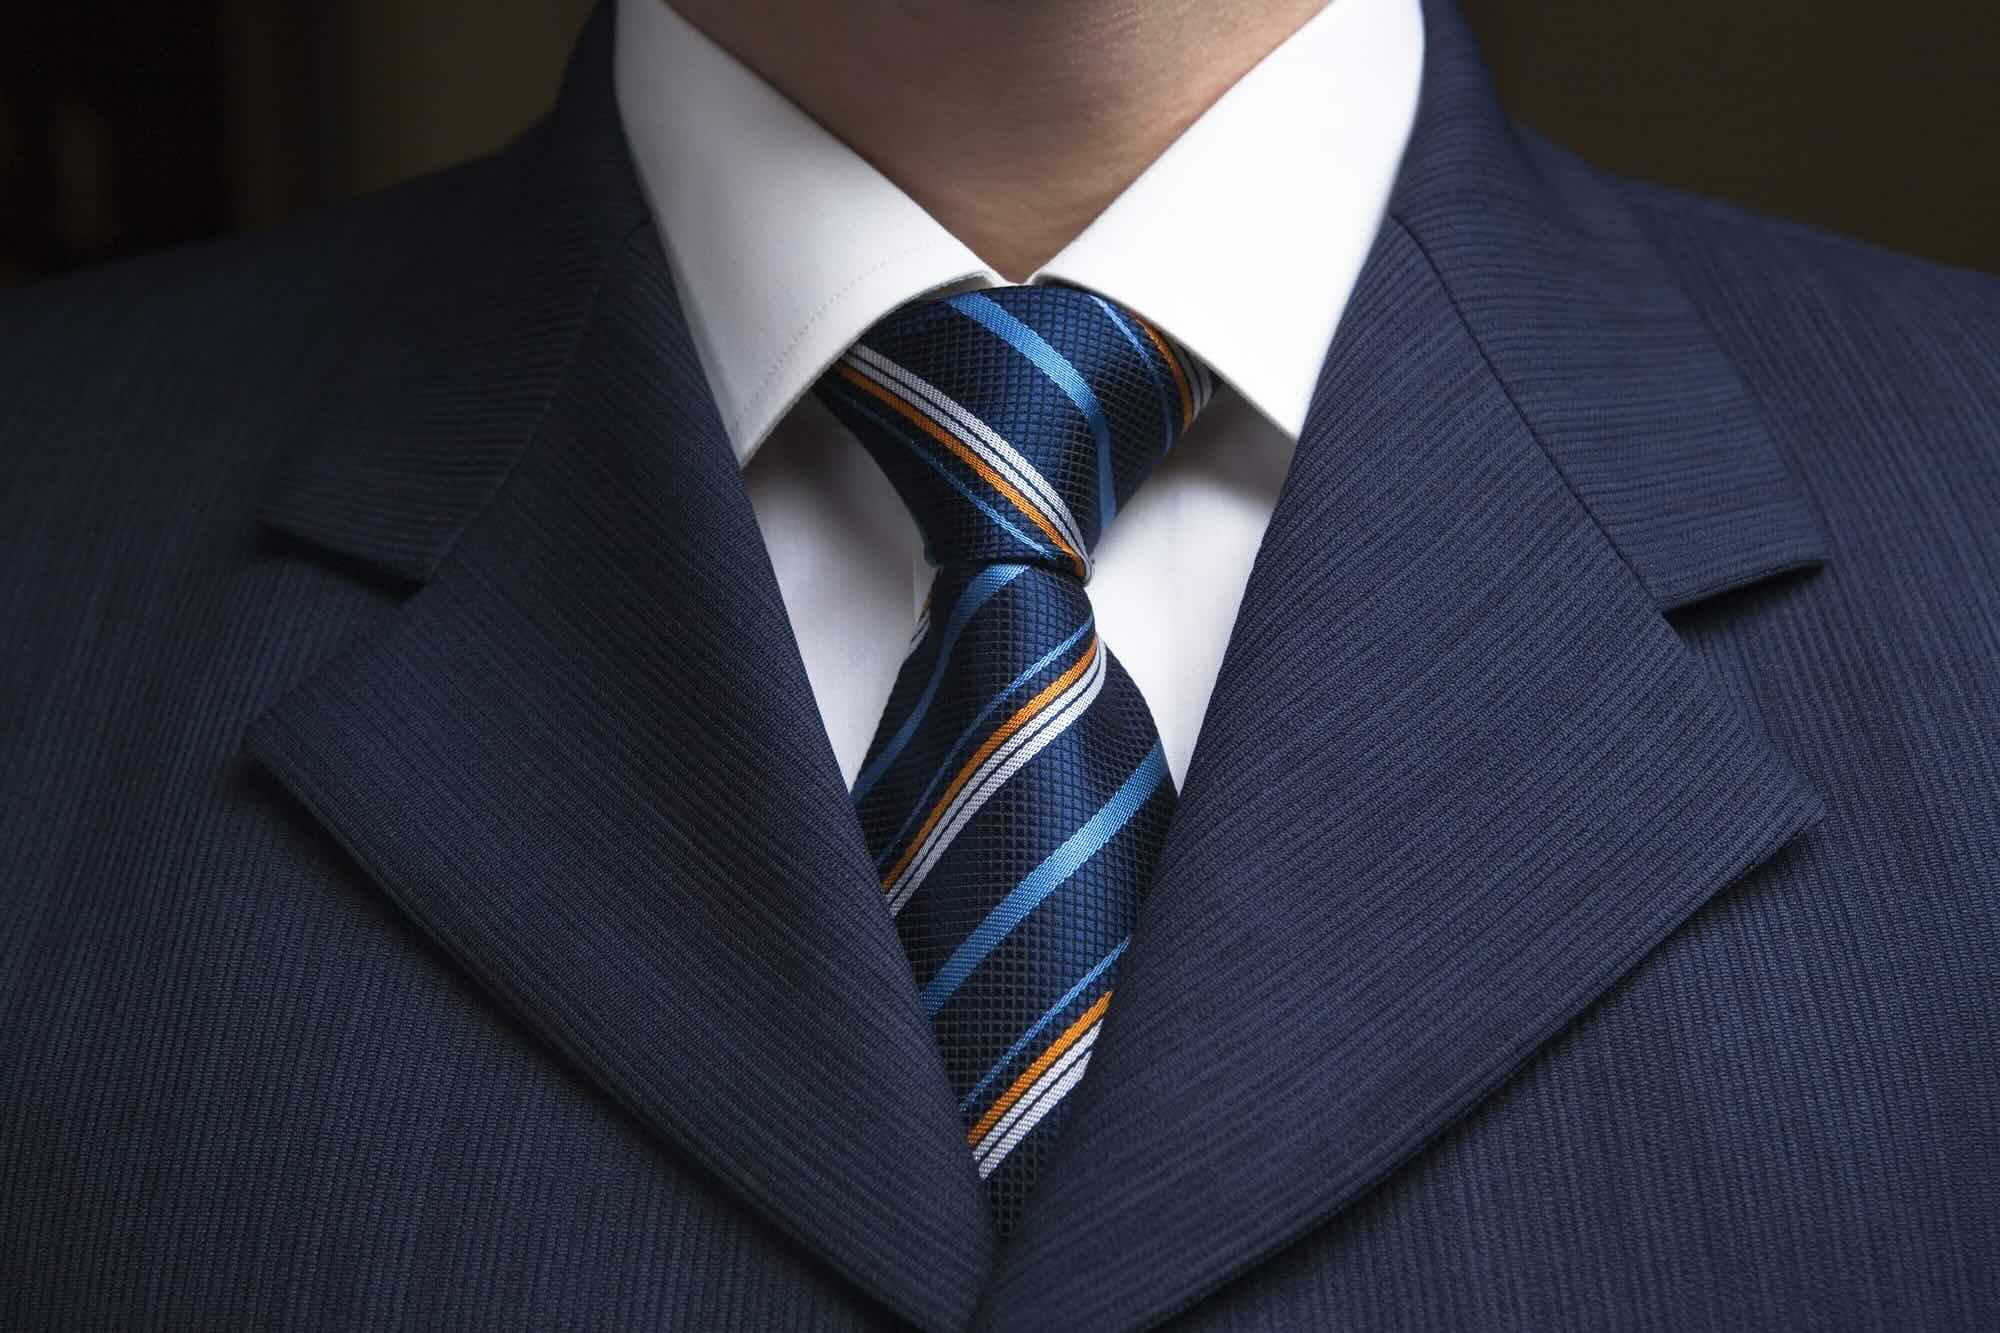 Tie Review: A Stylish Accessory for Every Occasion